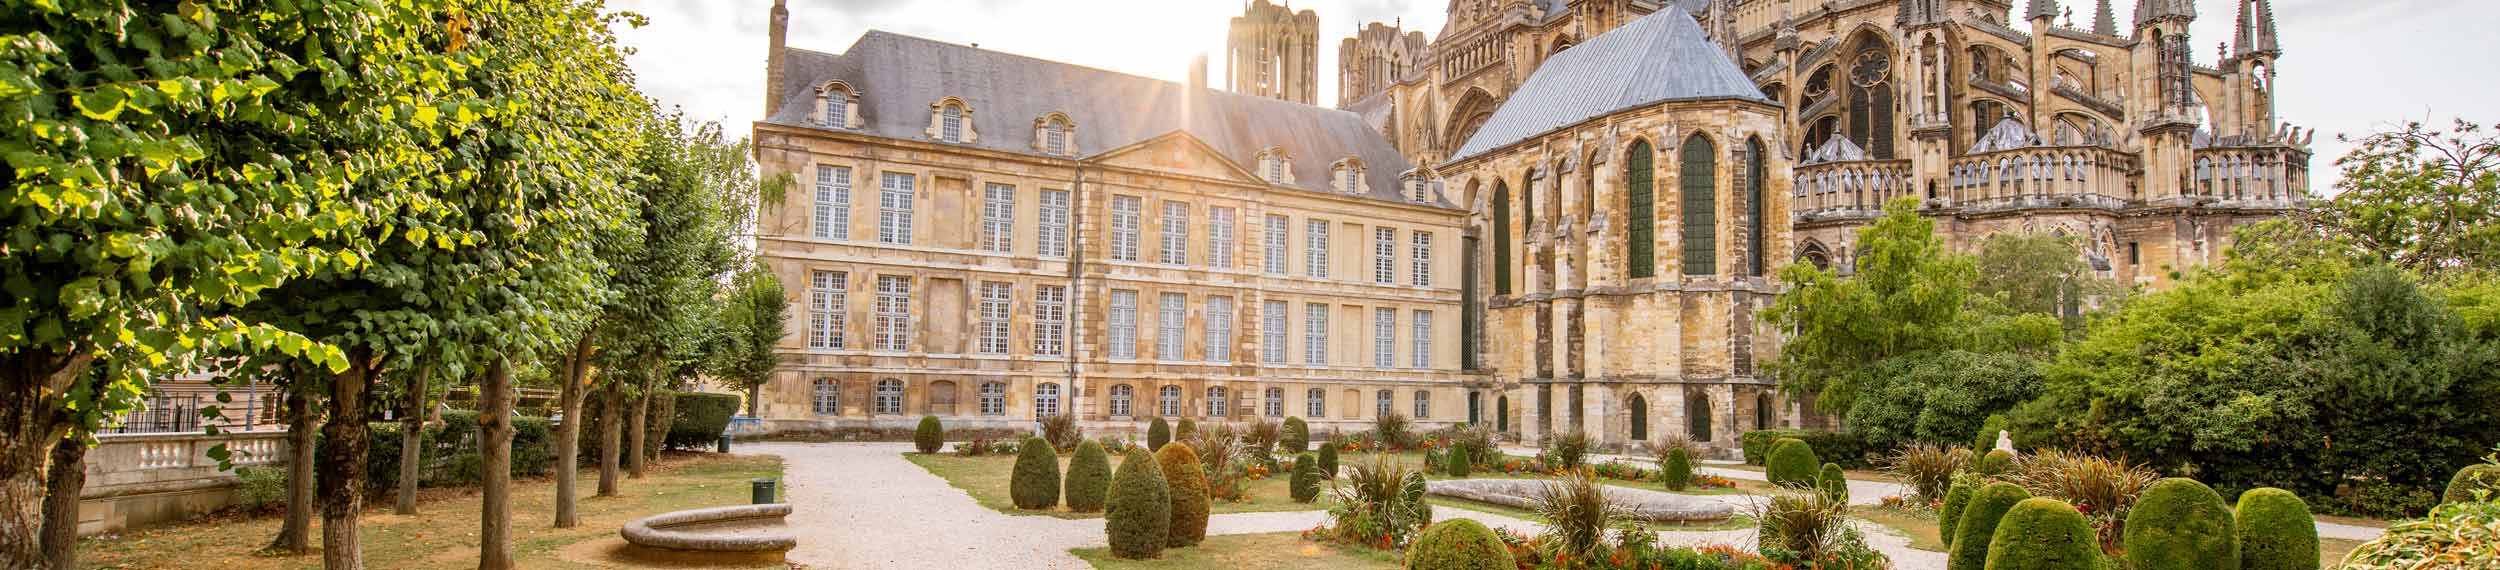 Gardens in Reims city near the Reims Cathedral. 